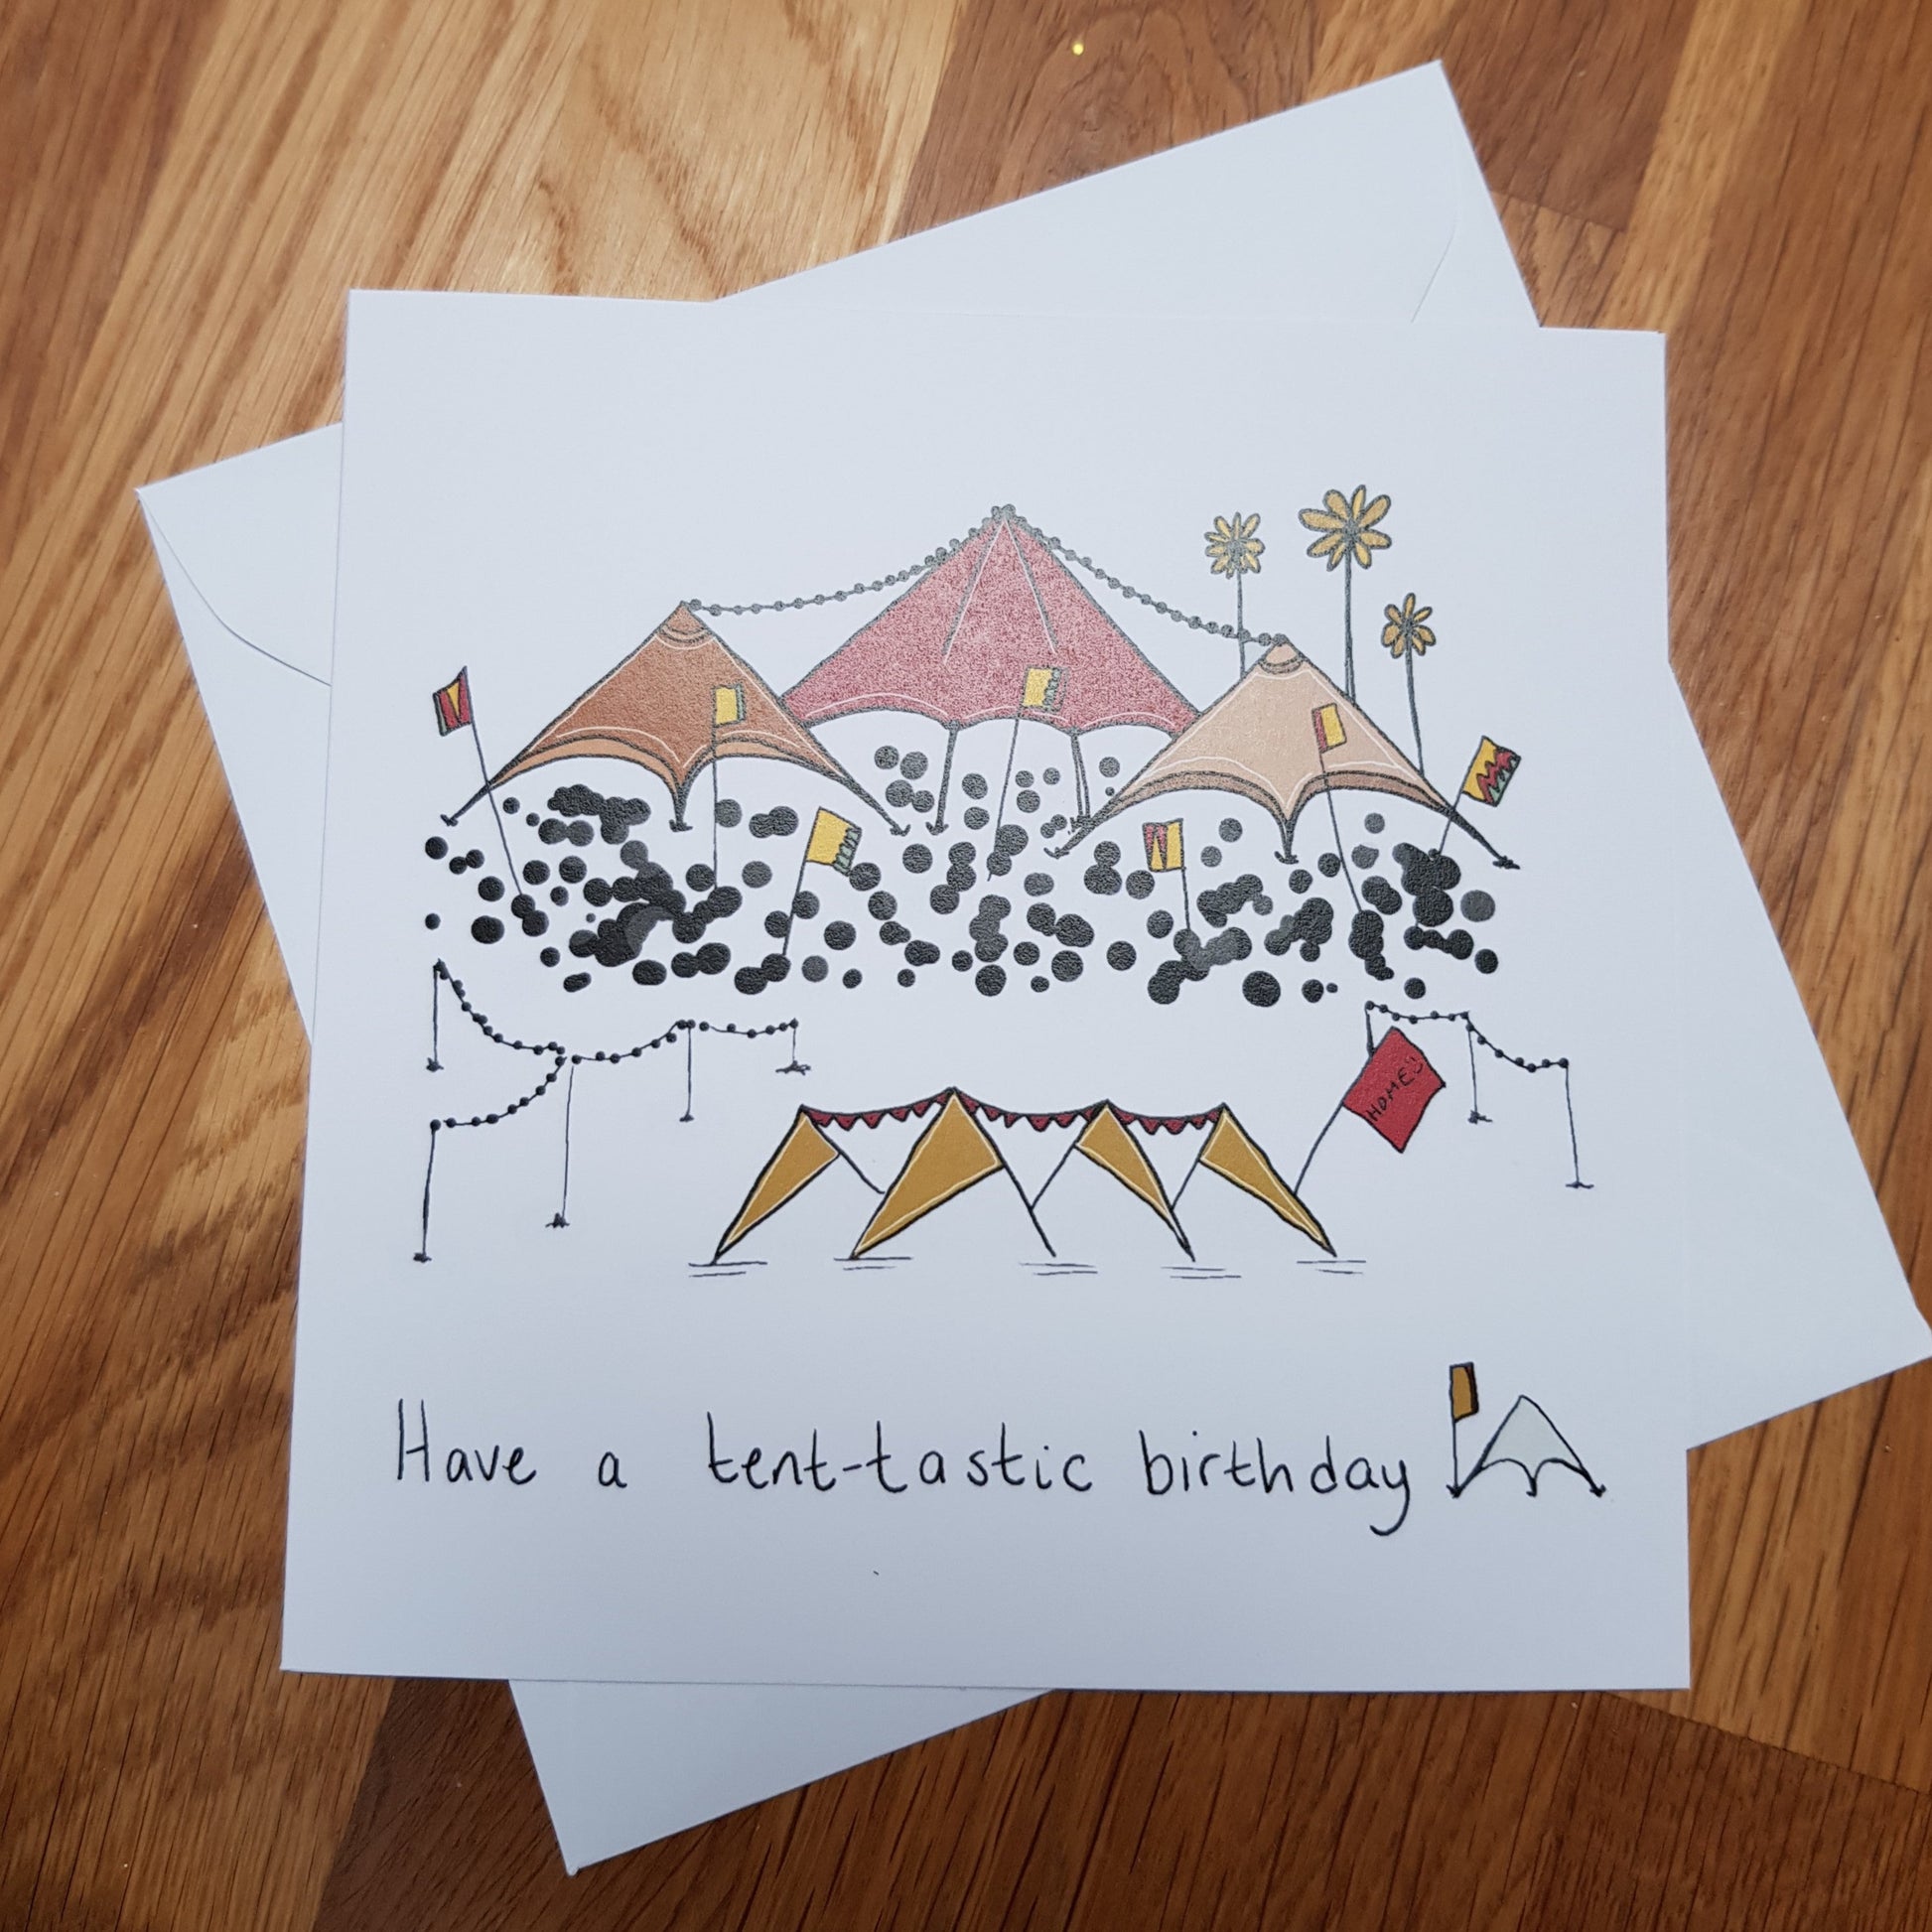 Have a tent-tastic birthday - festival inspired greeting card 